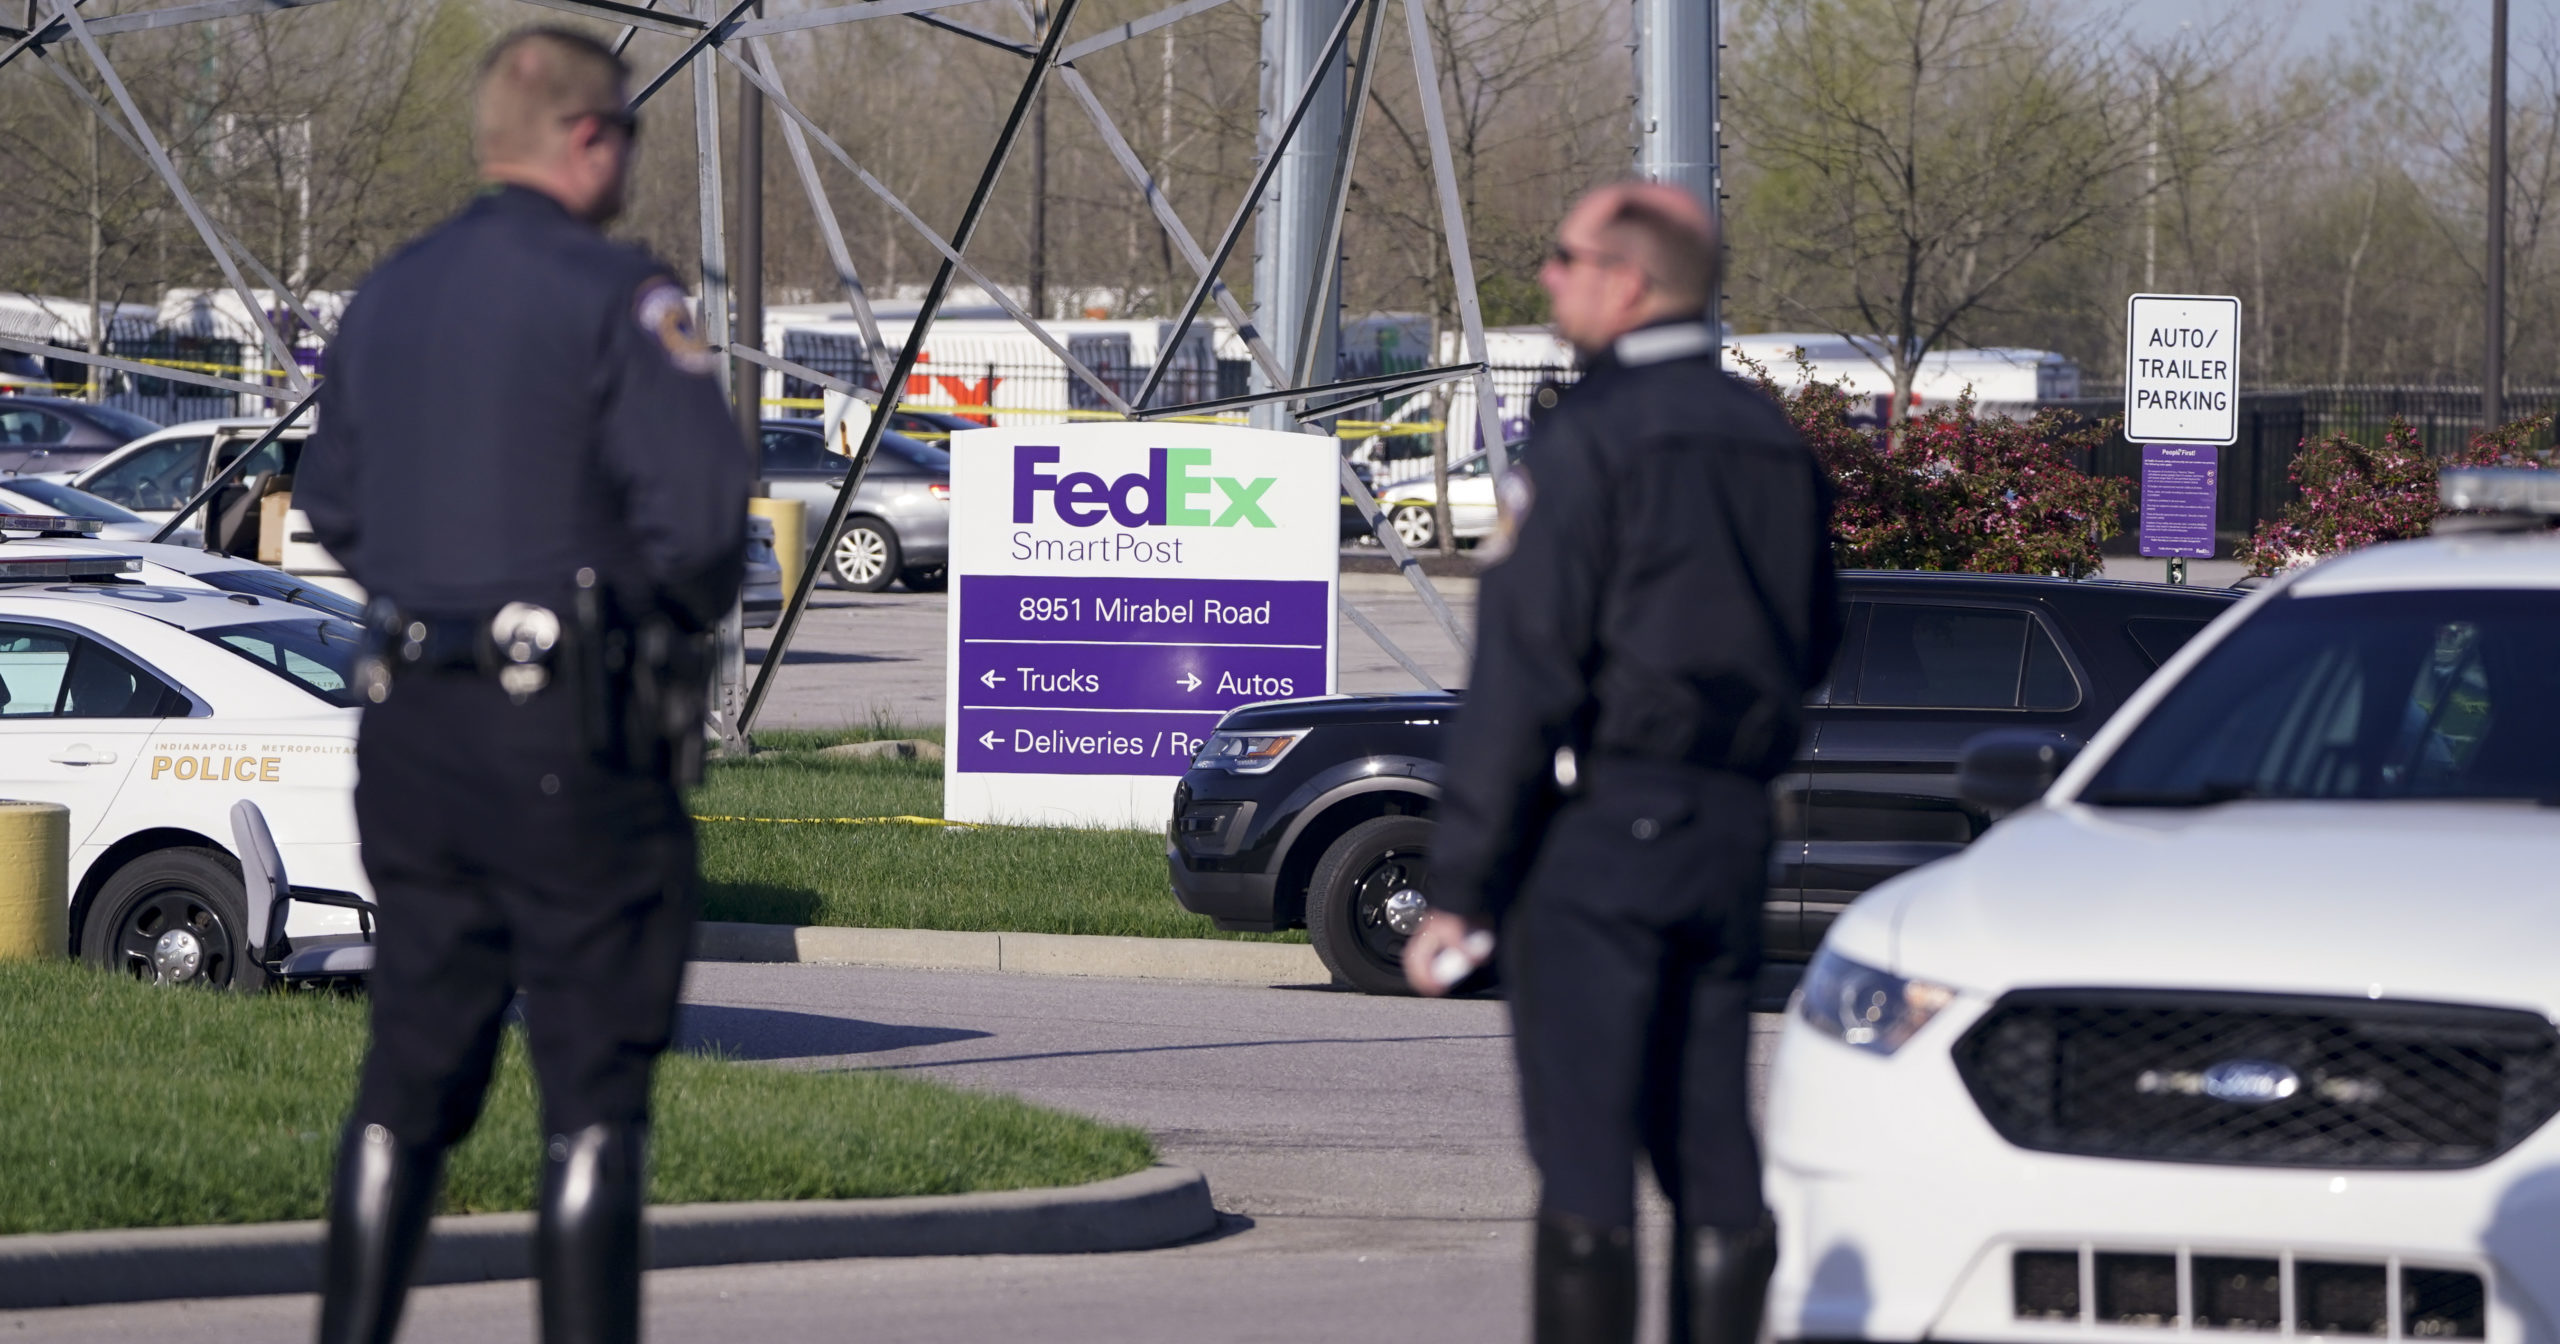 Police stand near the scene of a shooting at a FedEx facility in Indianapolis, Indiana, on April 16, 2021.